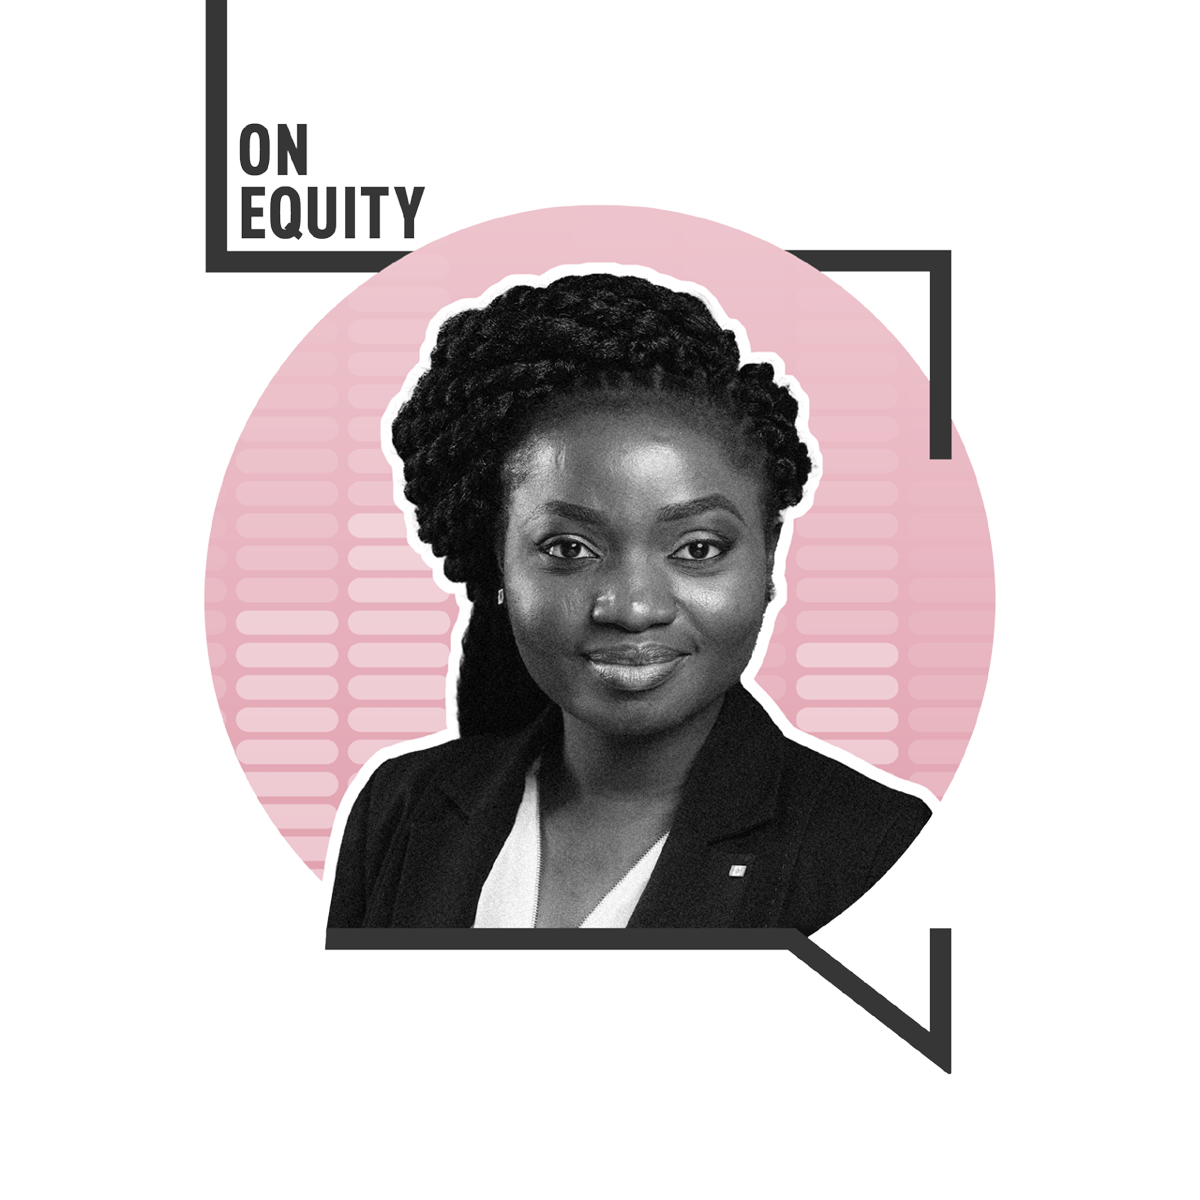 A black and white headshot of Ruth Mojeed Ramirez on a light pink circle inside the black outline of a speech bubble with the text "On Equity" in the top left corner.